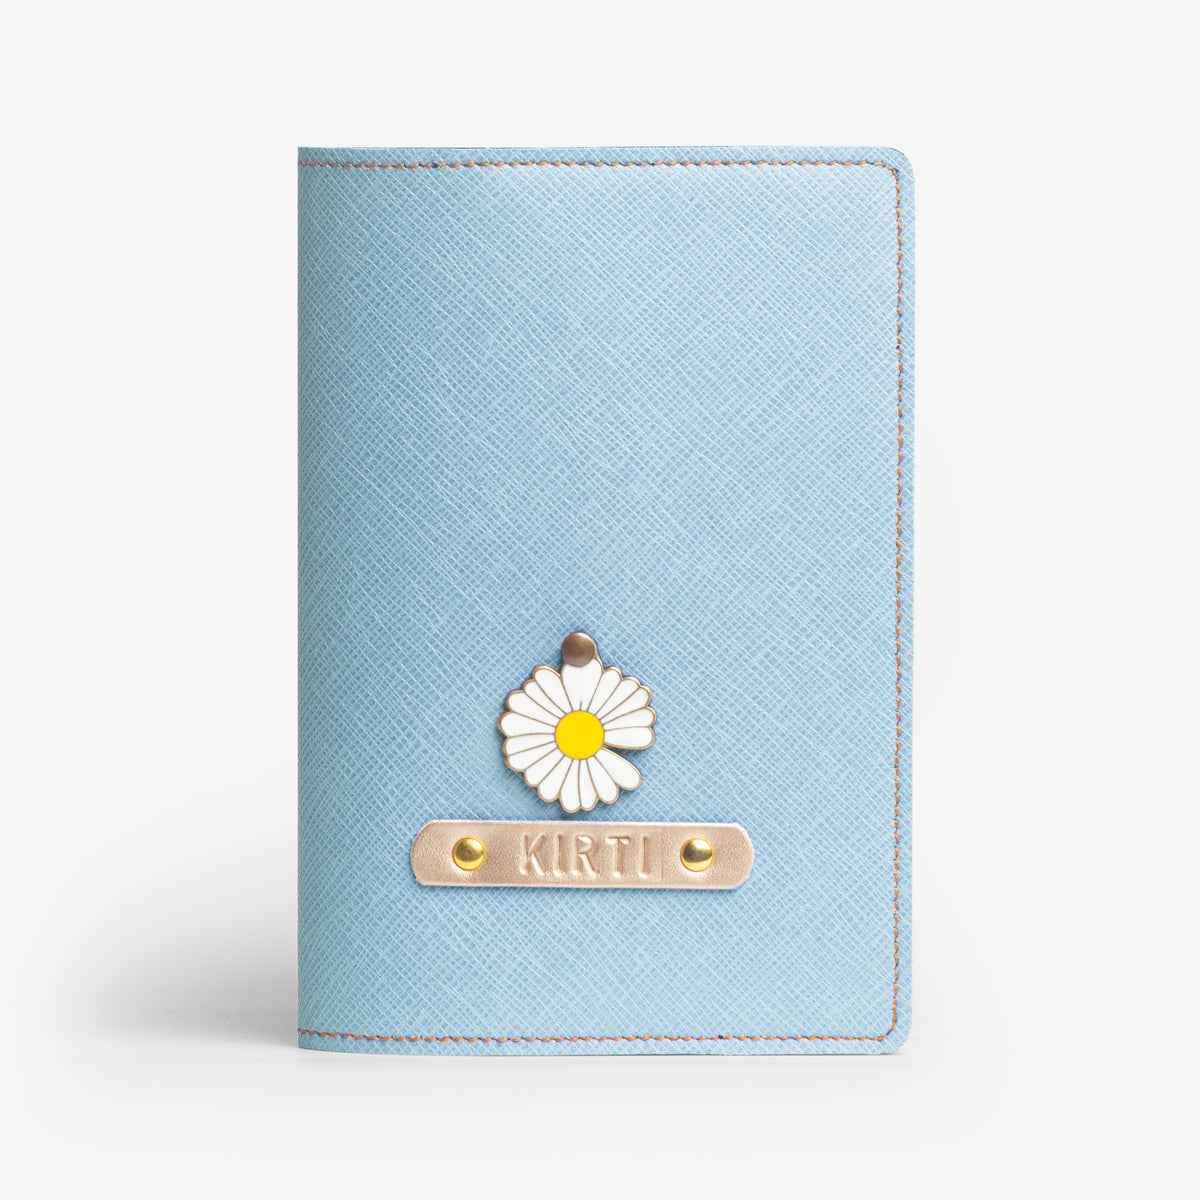 Personalized Passport Cover - Mint Blue